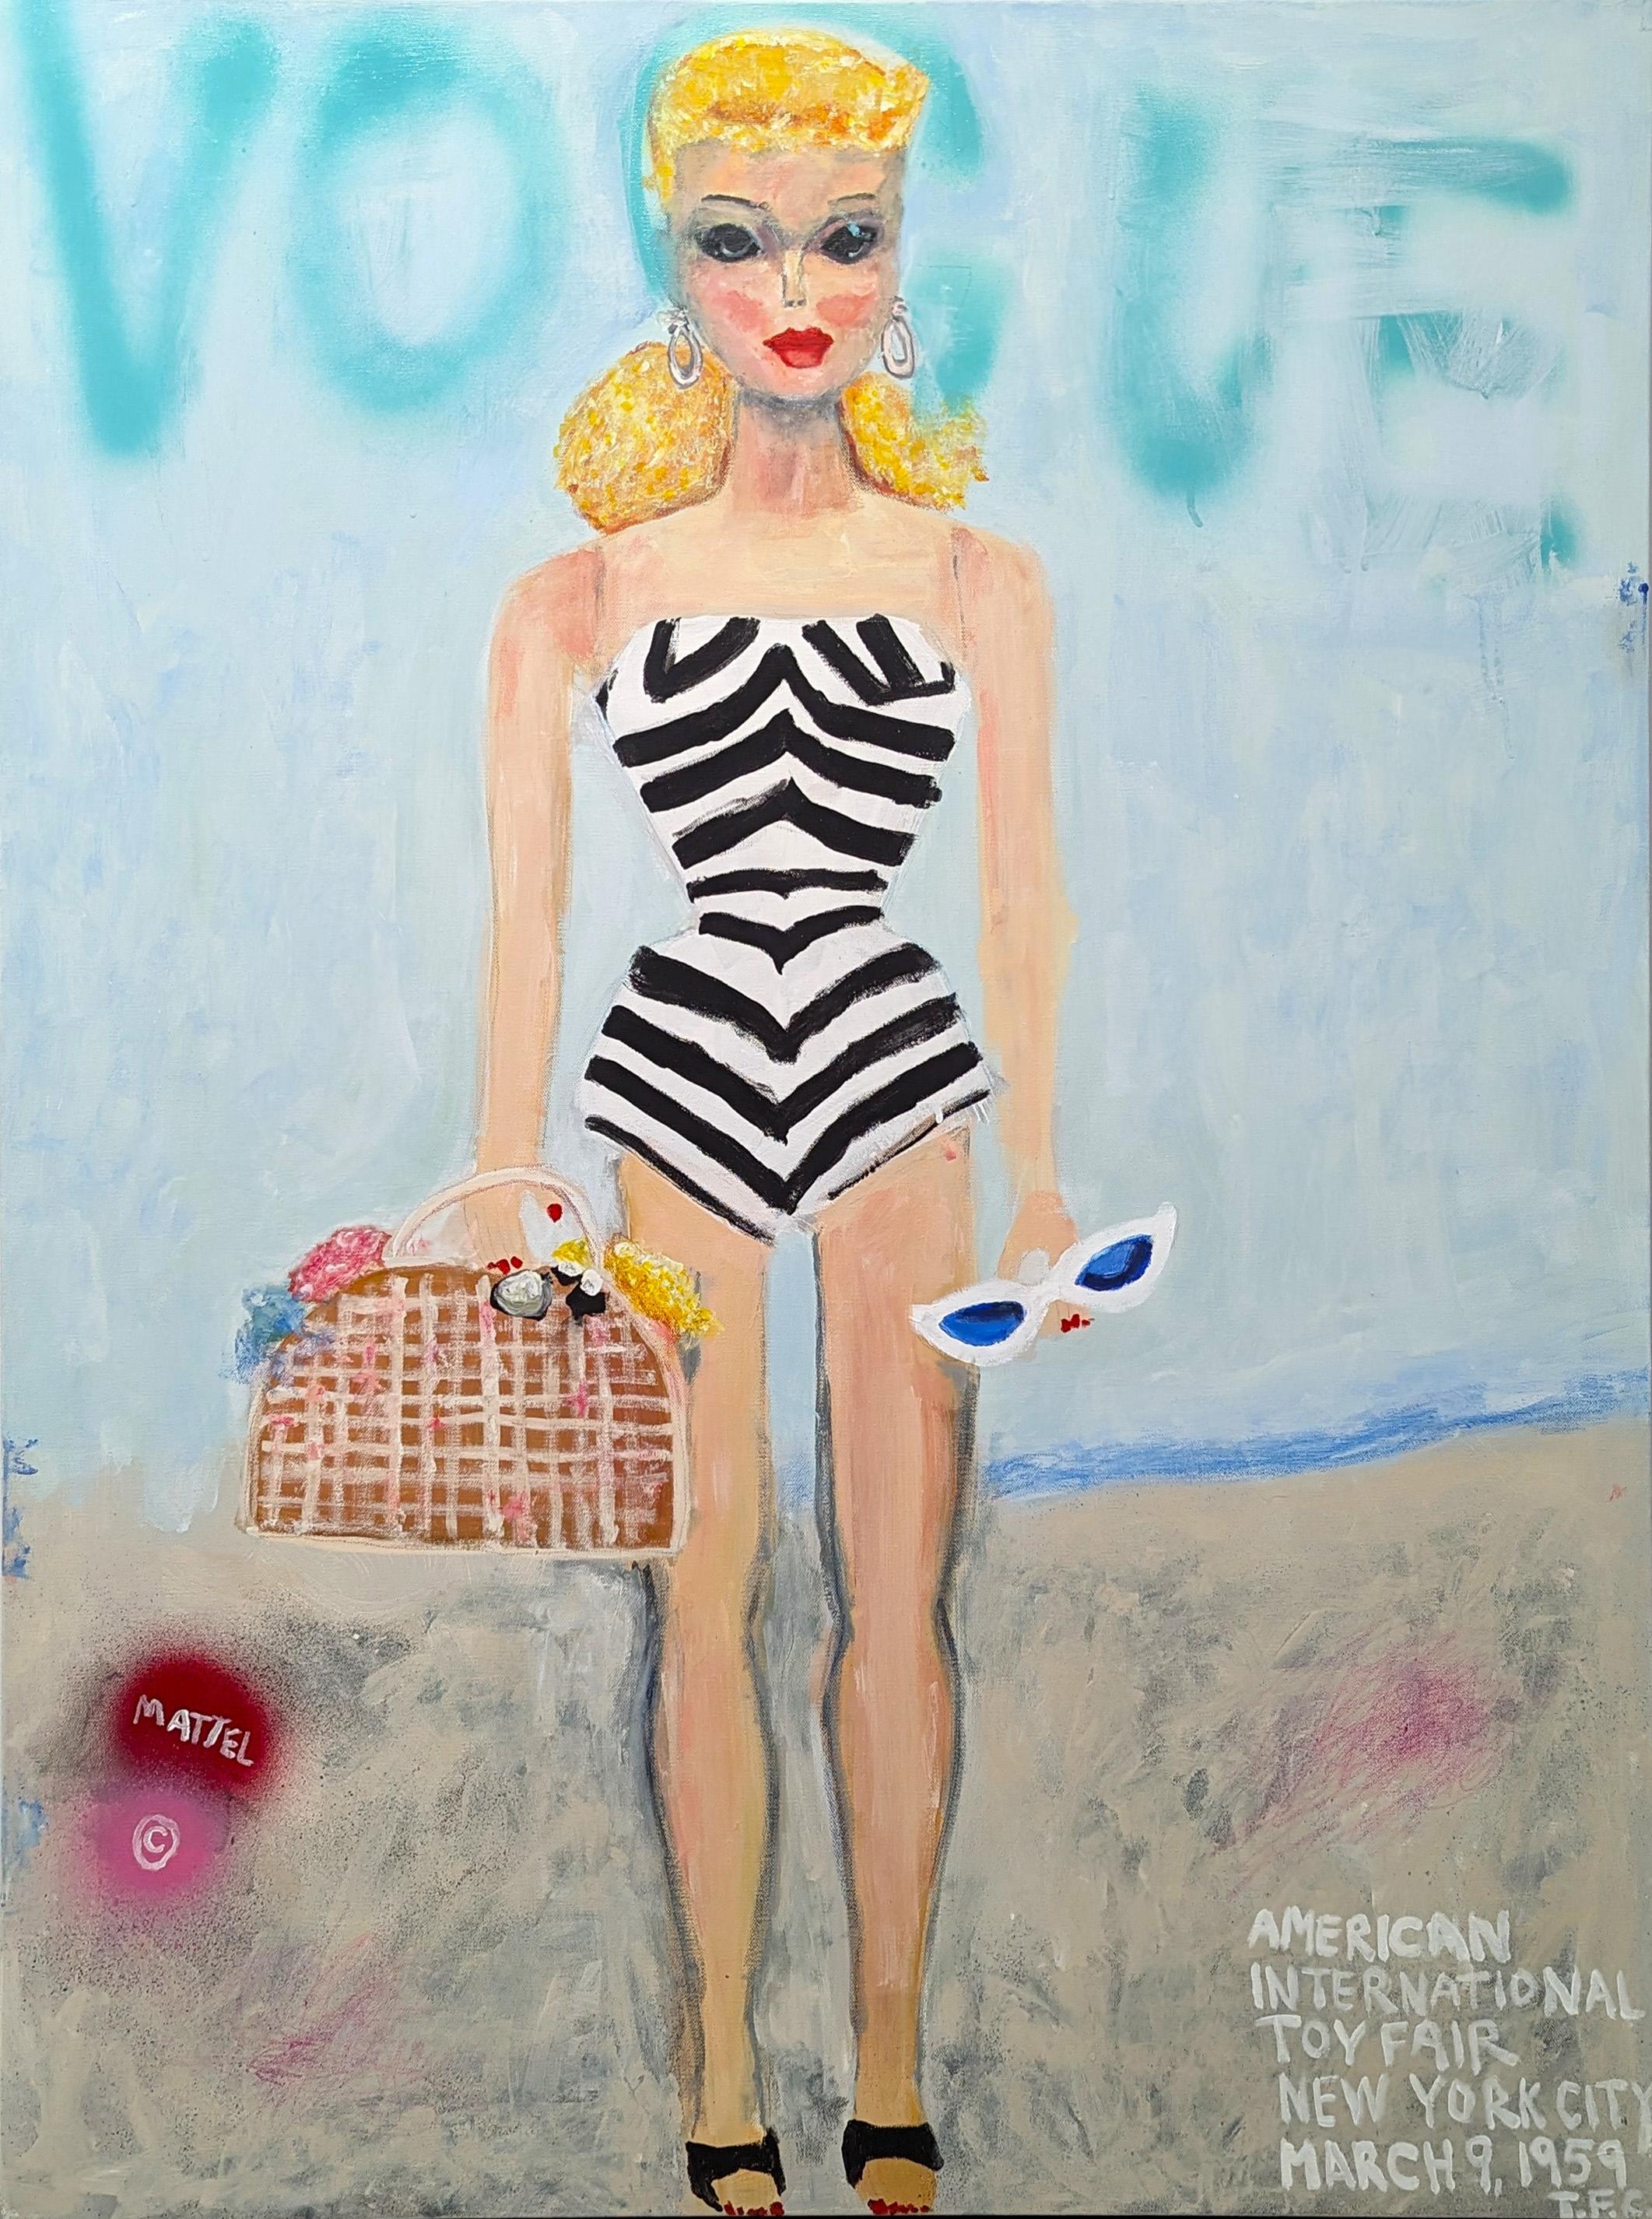 Tyler Casey Abstract Painting - "Barbie" Contemporary Abstract Pop Art Vintage Toy Painting